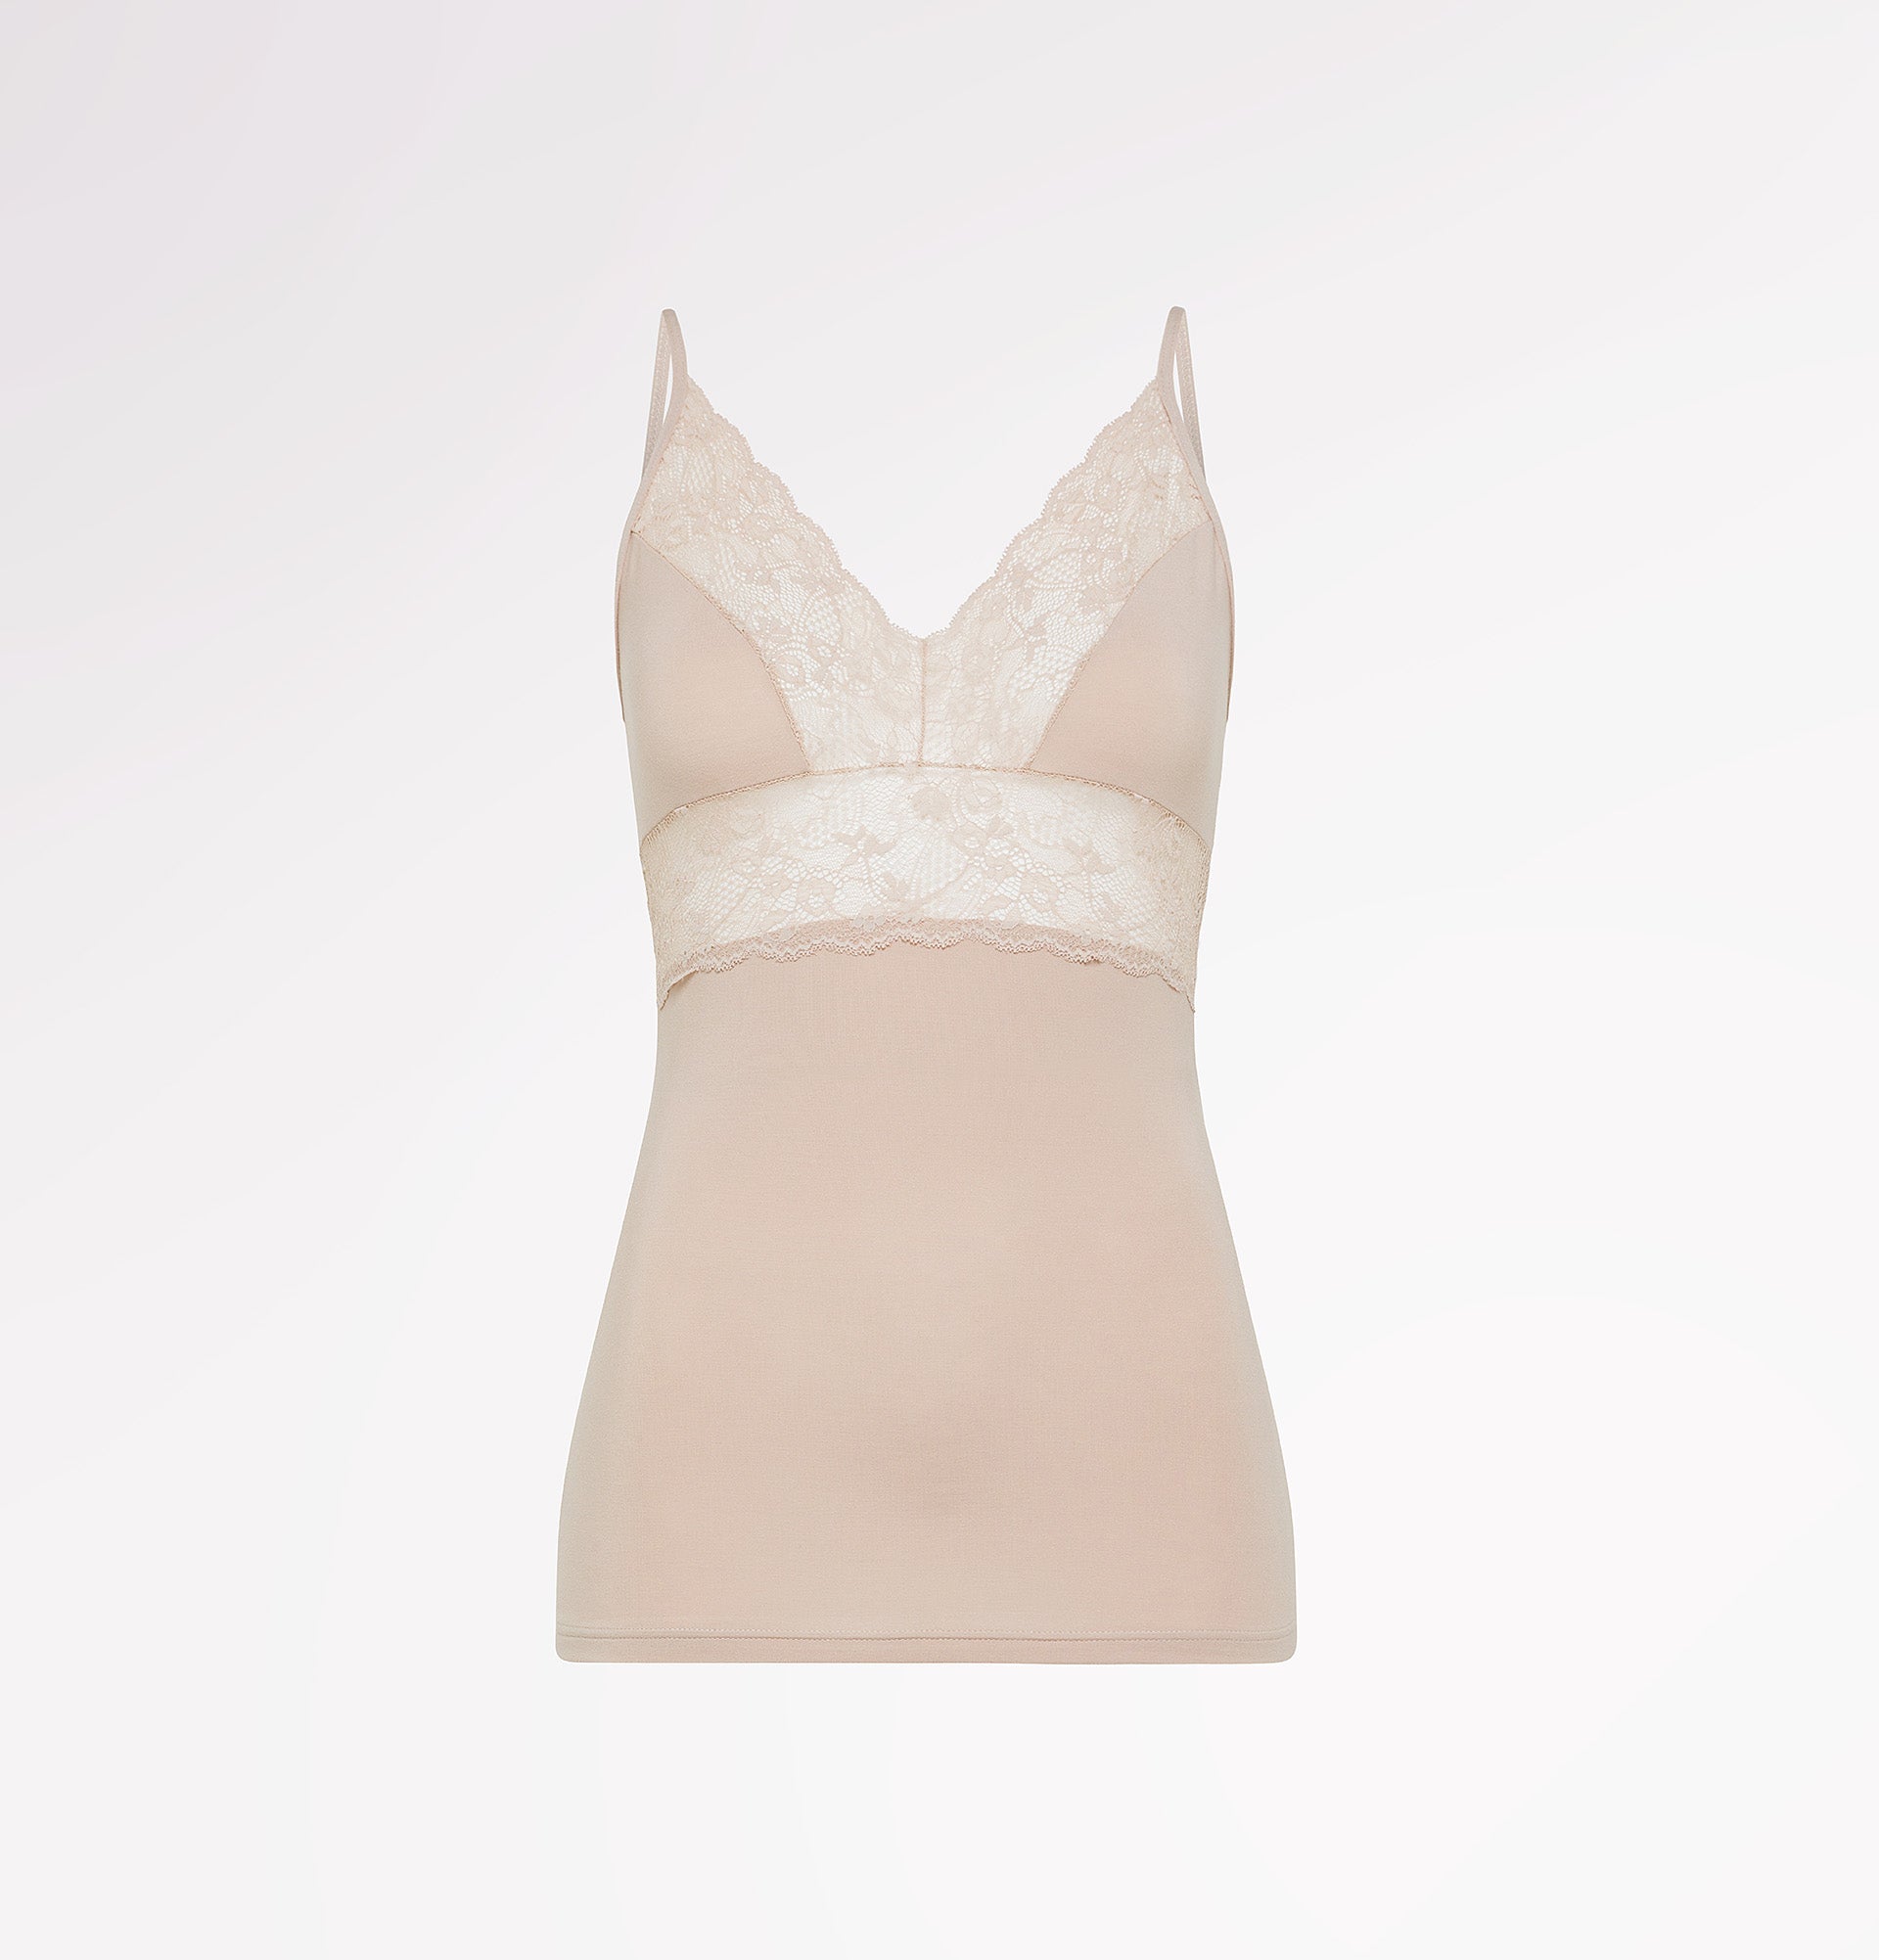 Tank top in natural fabric and biodegradable lace